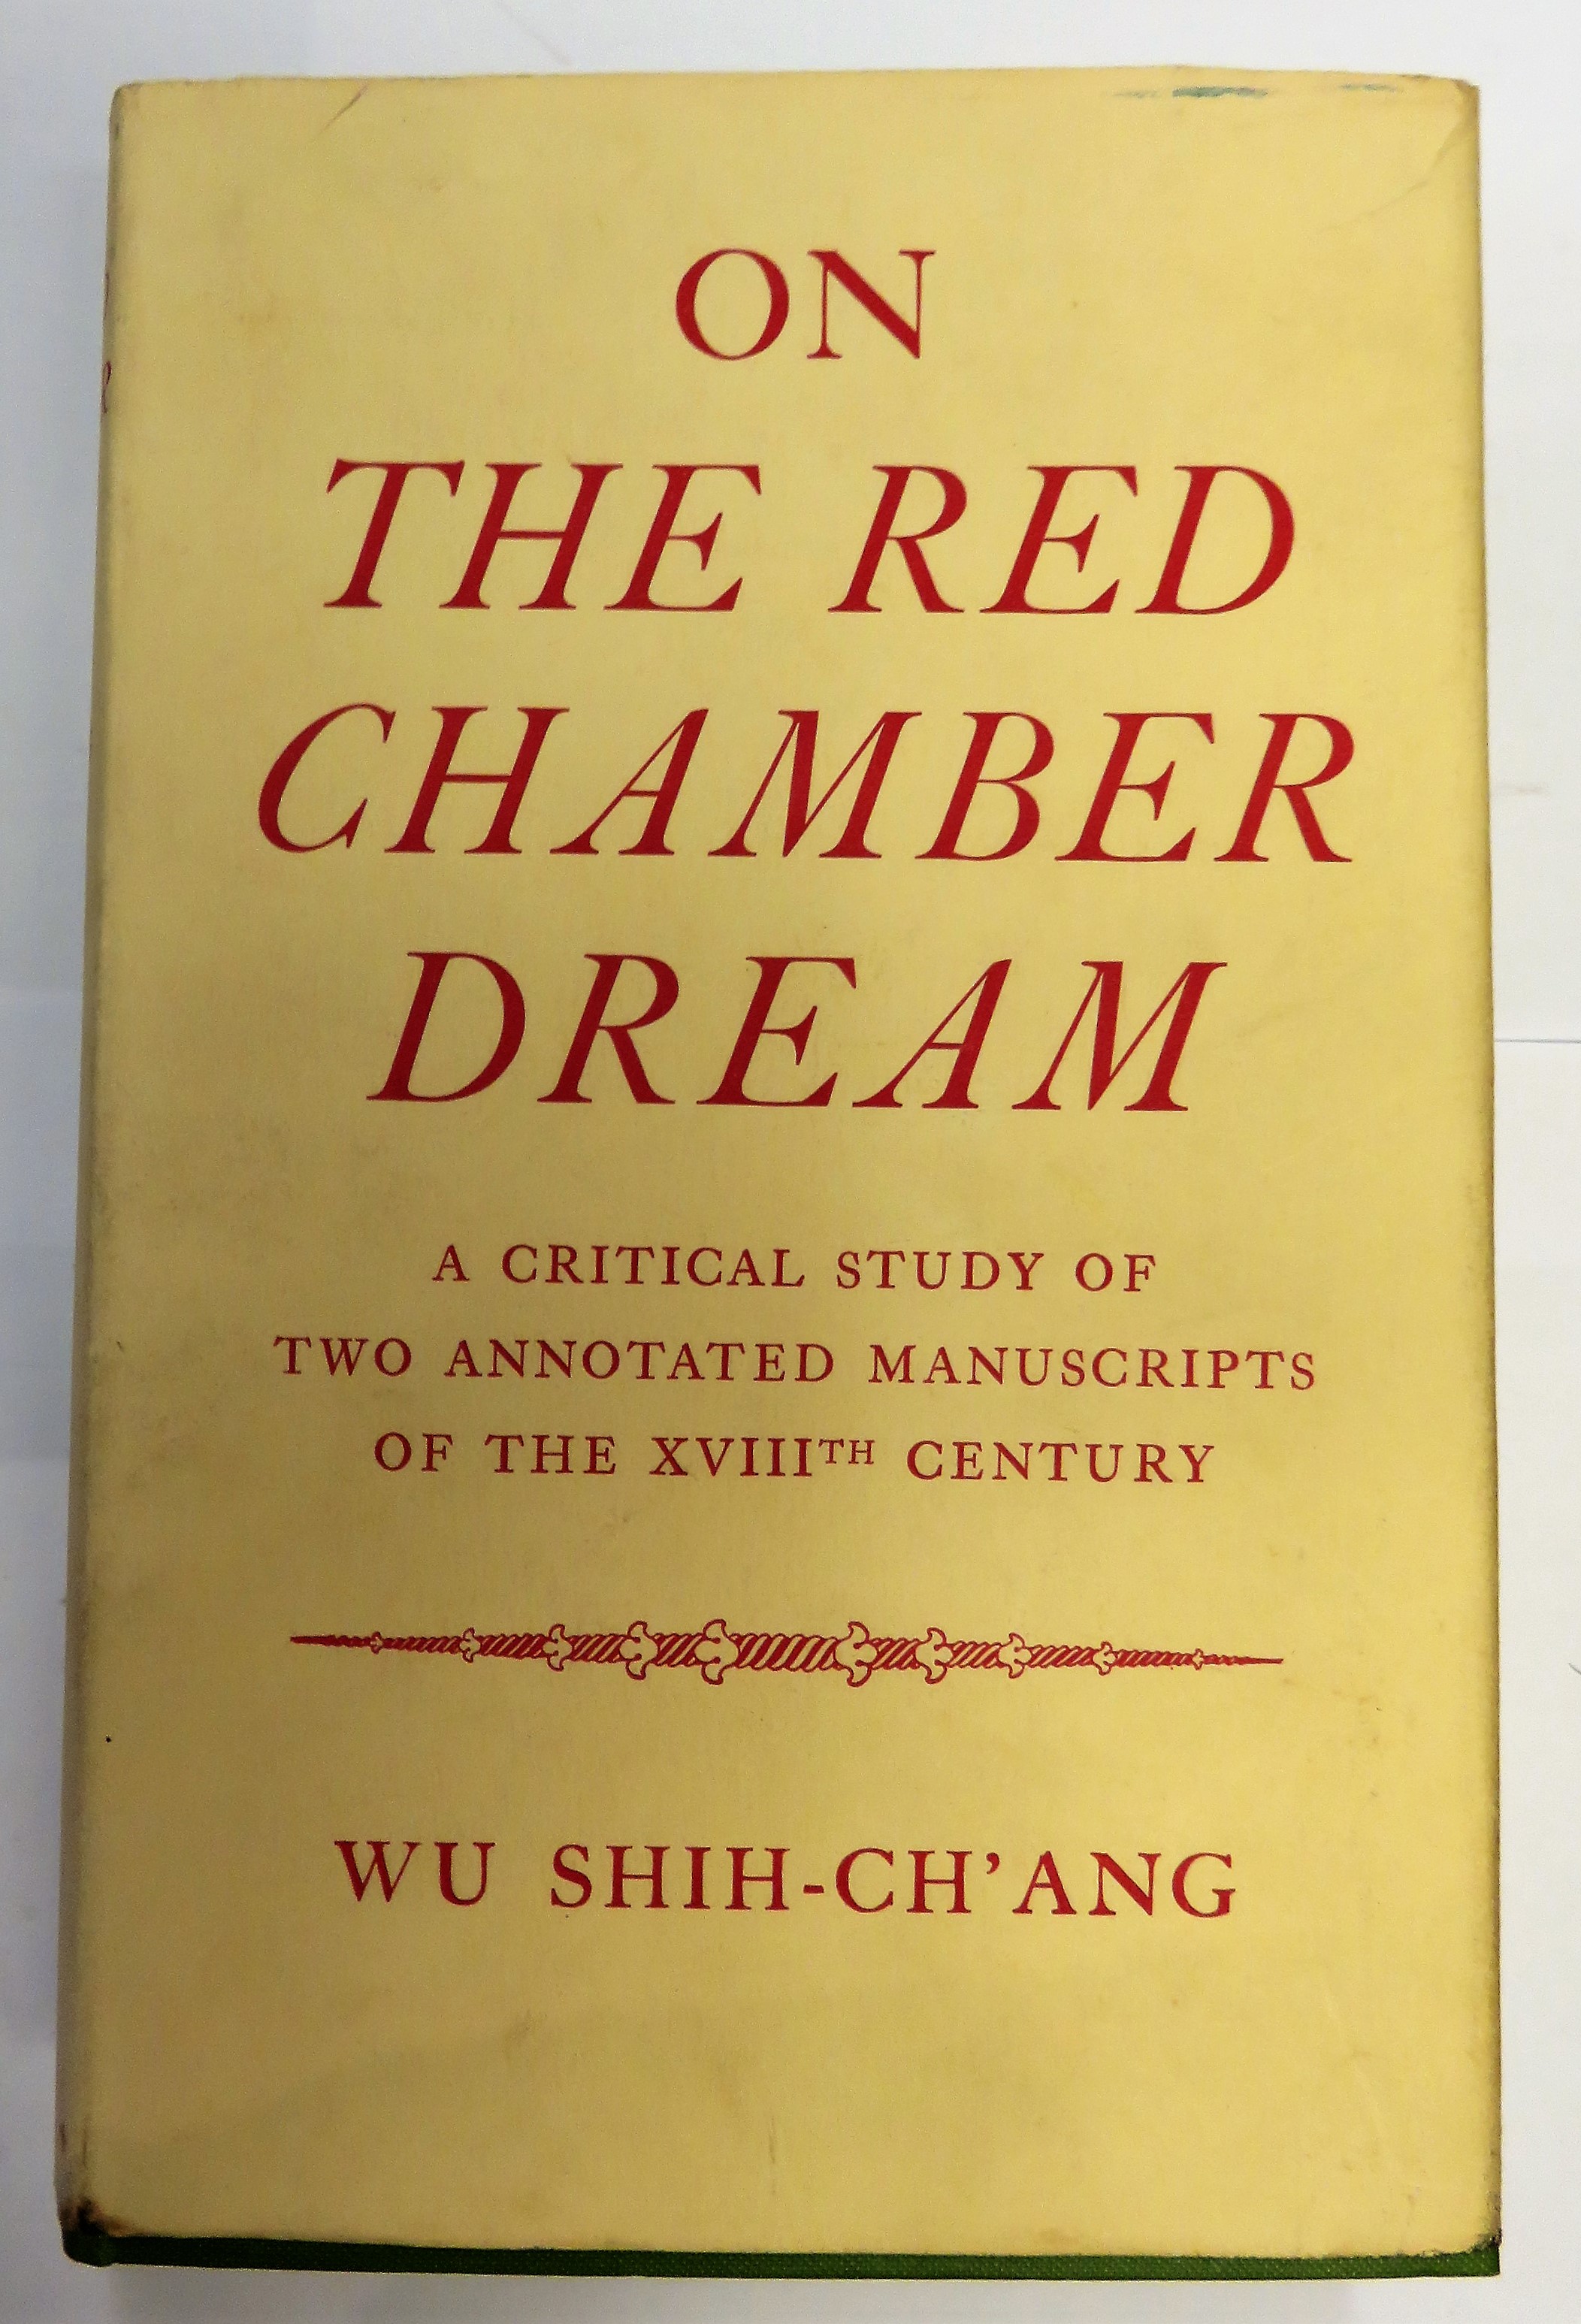 On The Red Chamber Dream